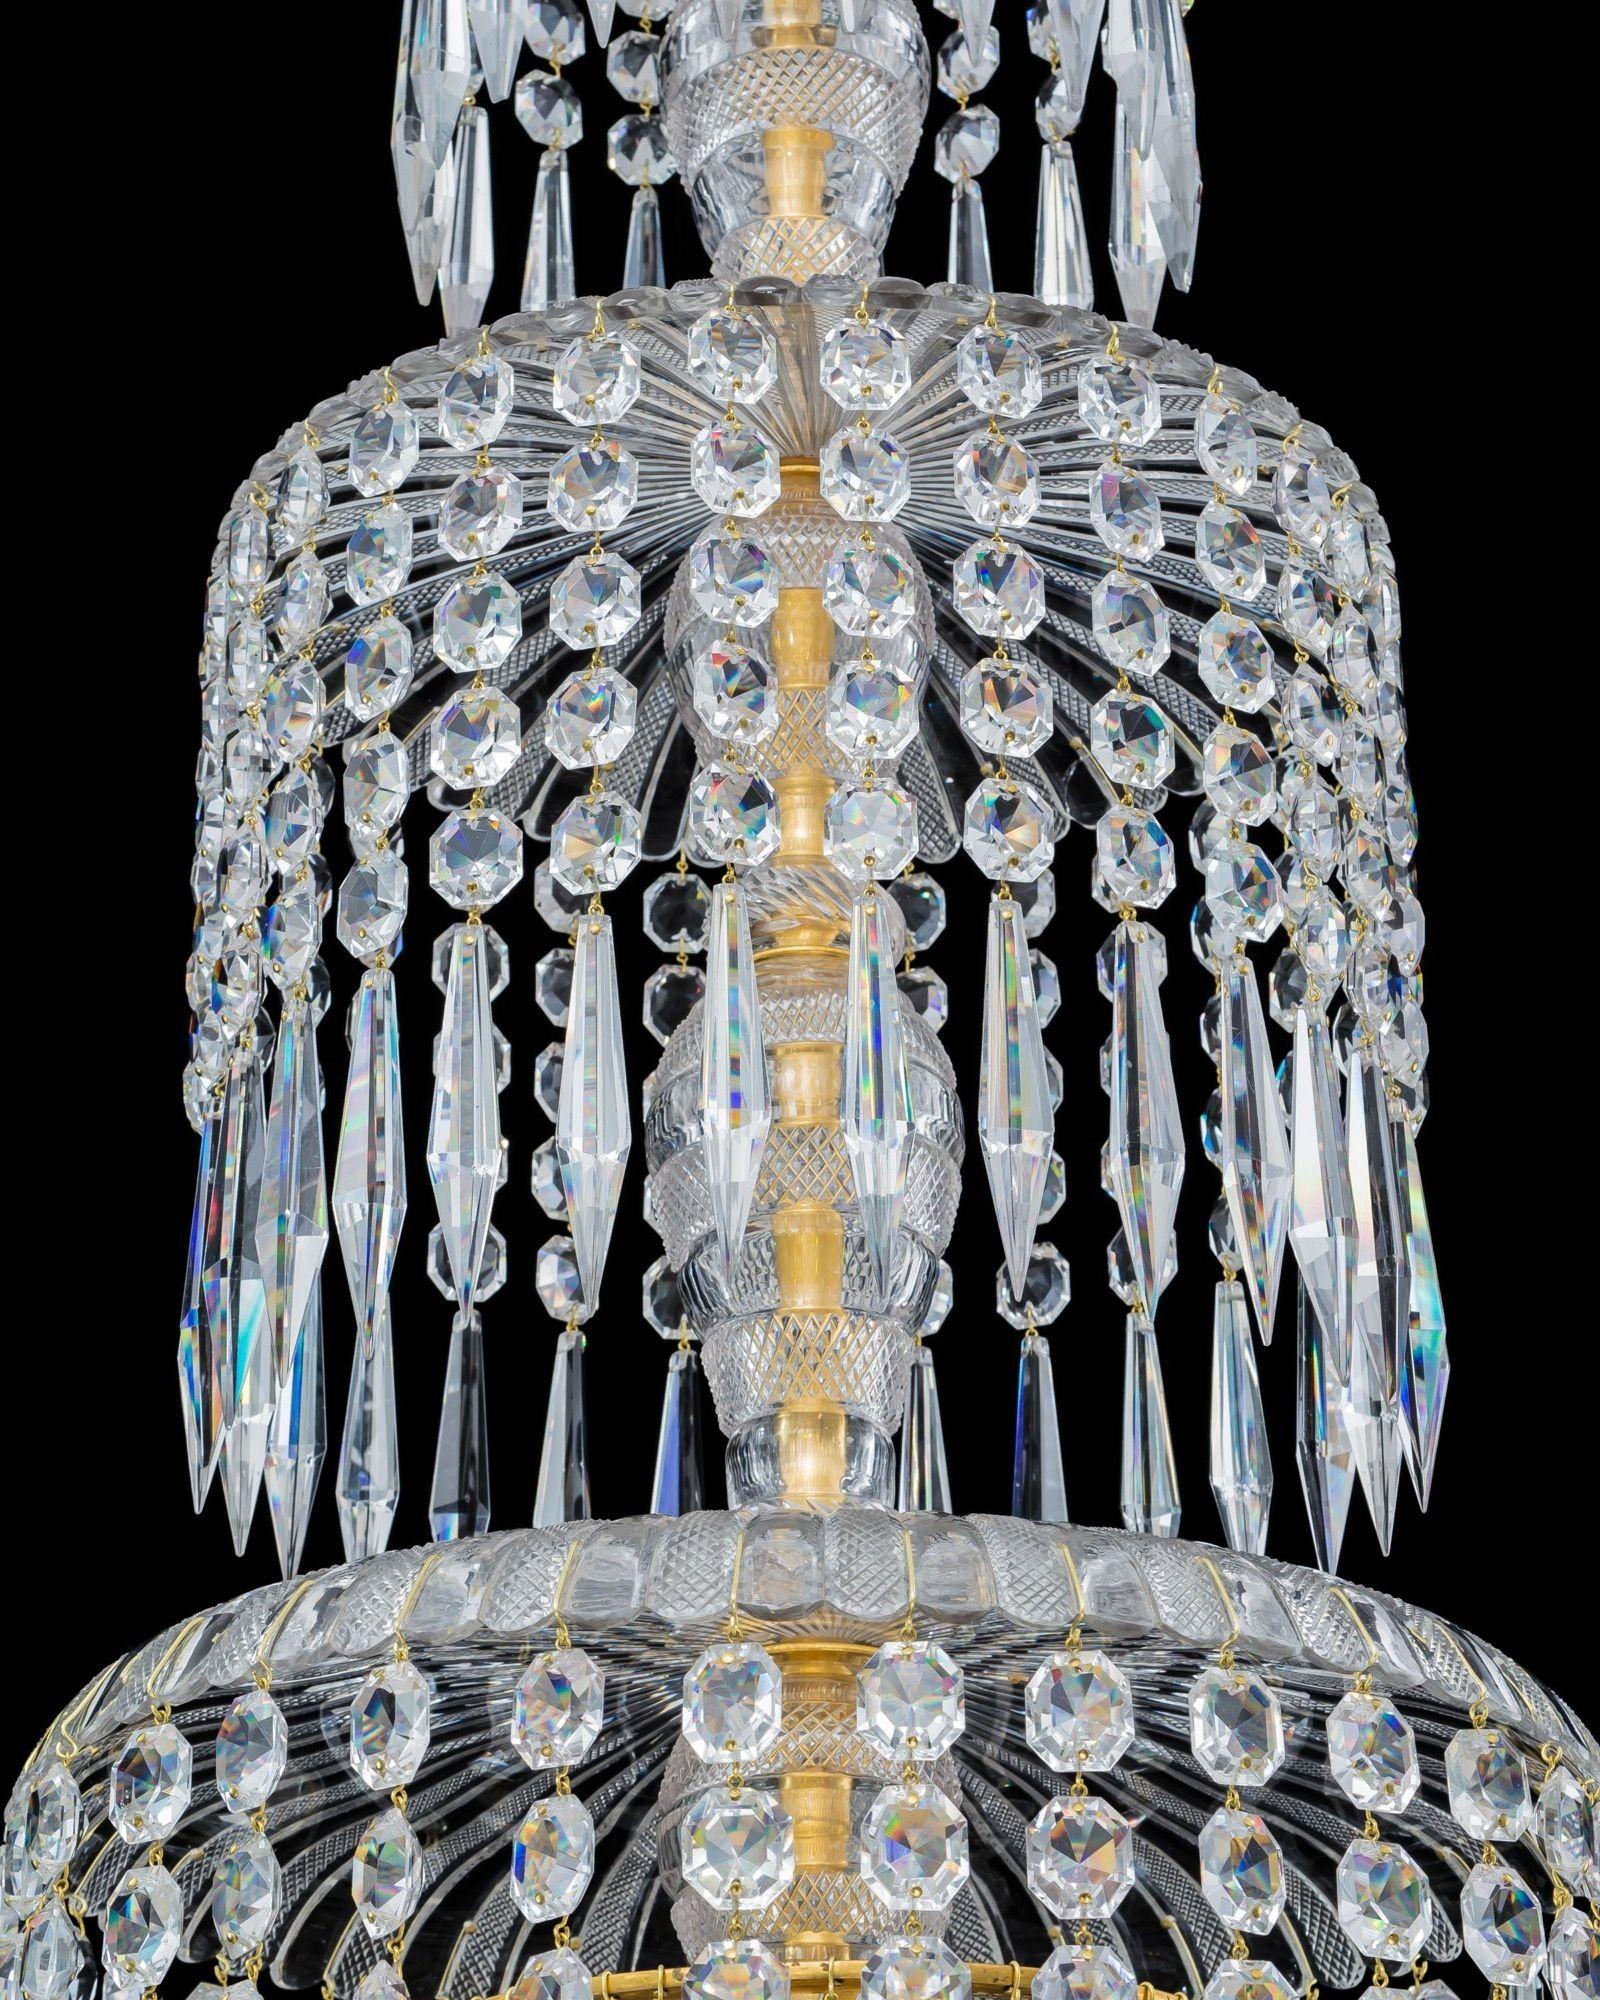 An Exceptionally Large 12 Light Regency Chandelier Attributed To John Blades In Good Condition For Sale In Steyning, West sussex